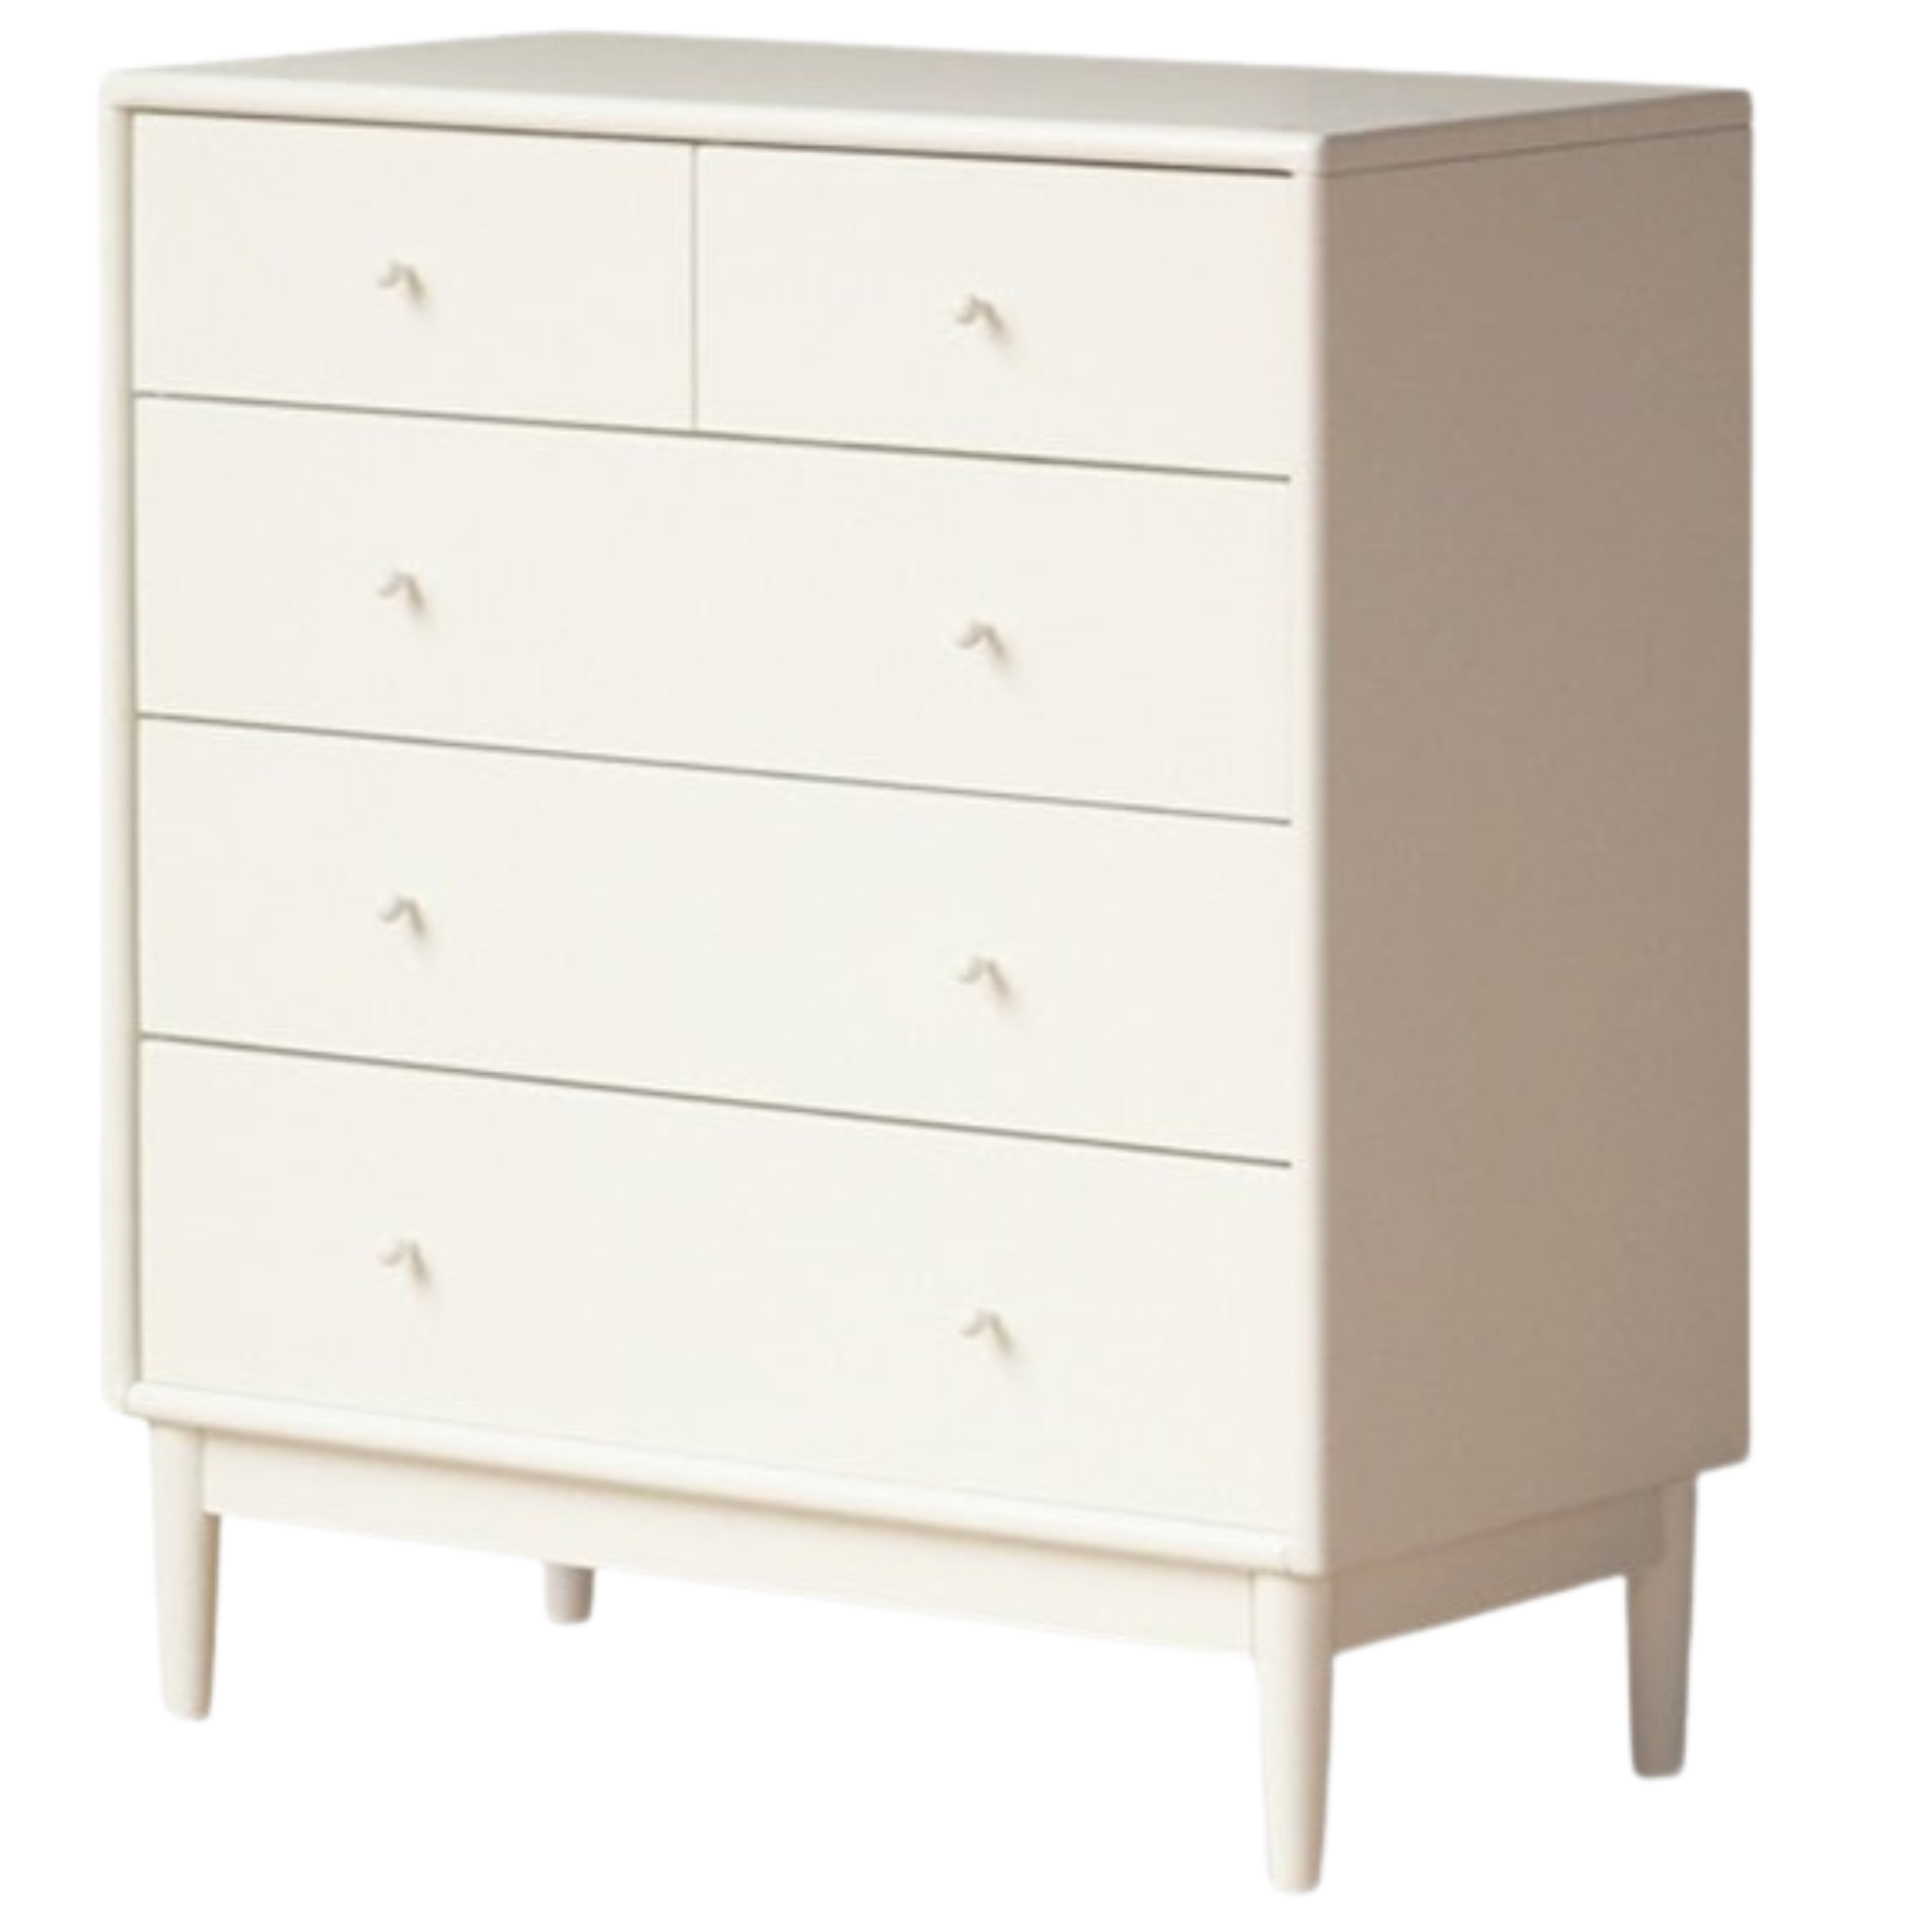 Poplar solid wood chest of drawers storage cabinet cream style drawers cabinet)